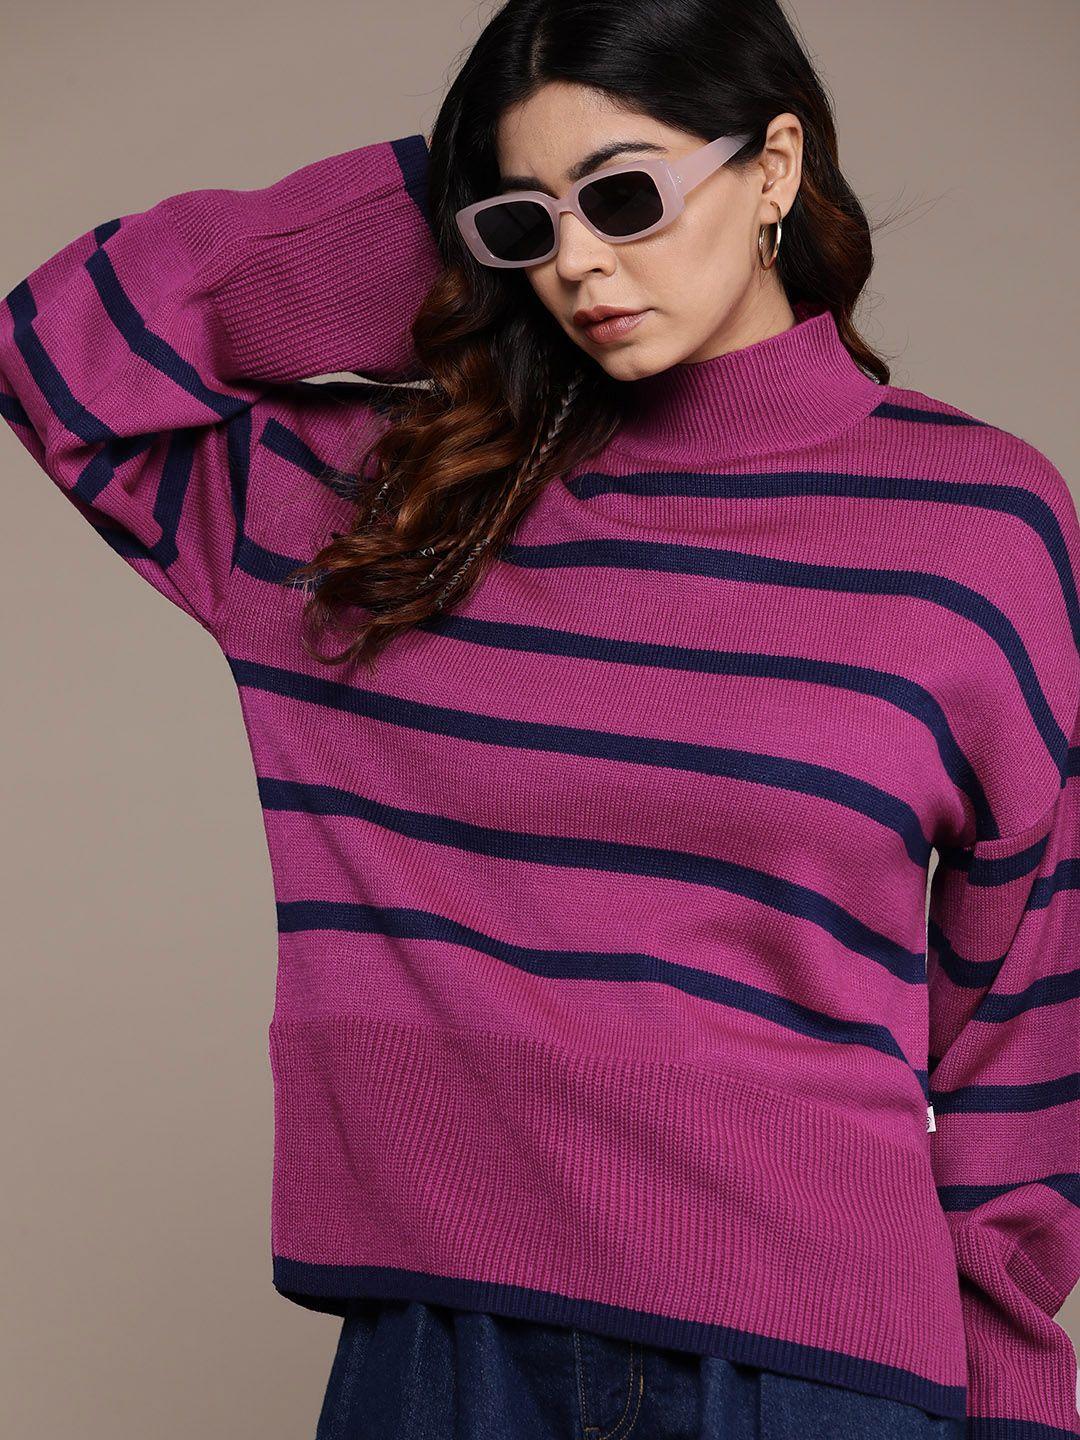 the roadster lifestyle co. flared sleeves striped pullover